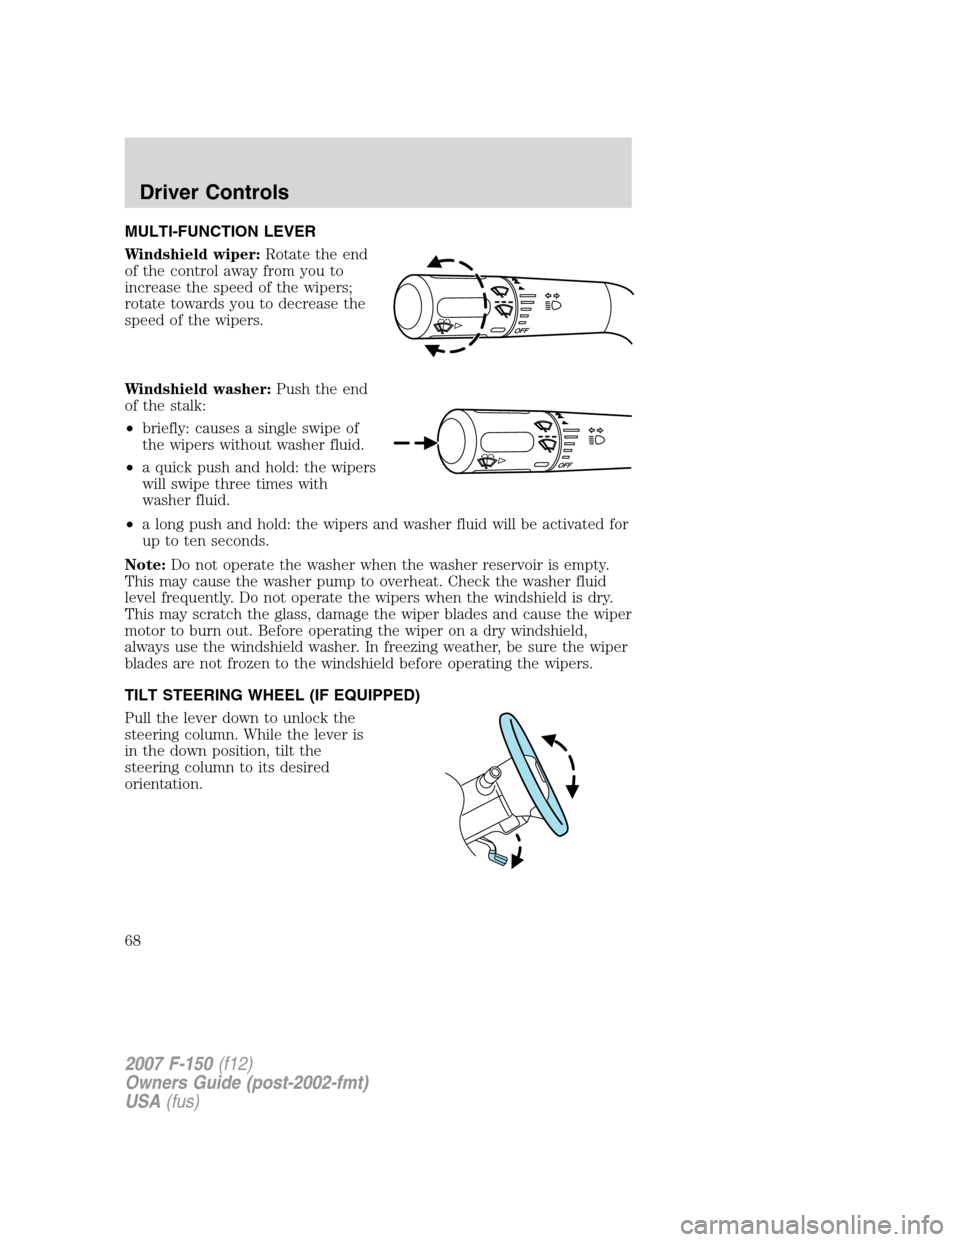 FORD F150 2007 11.G Owners Manual MULTI-FUNCTION LEVER
Windshield wiper:Rotate the end
of the control away from you to
increase the speed of the wipers;
rotate towards you to decrease the
speed of the wipers.
Windshield washer:Push th